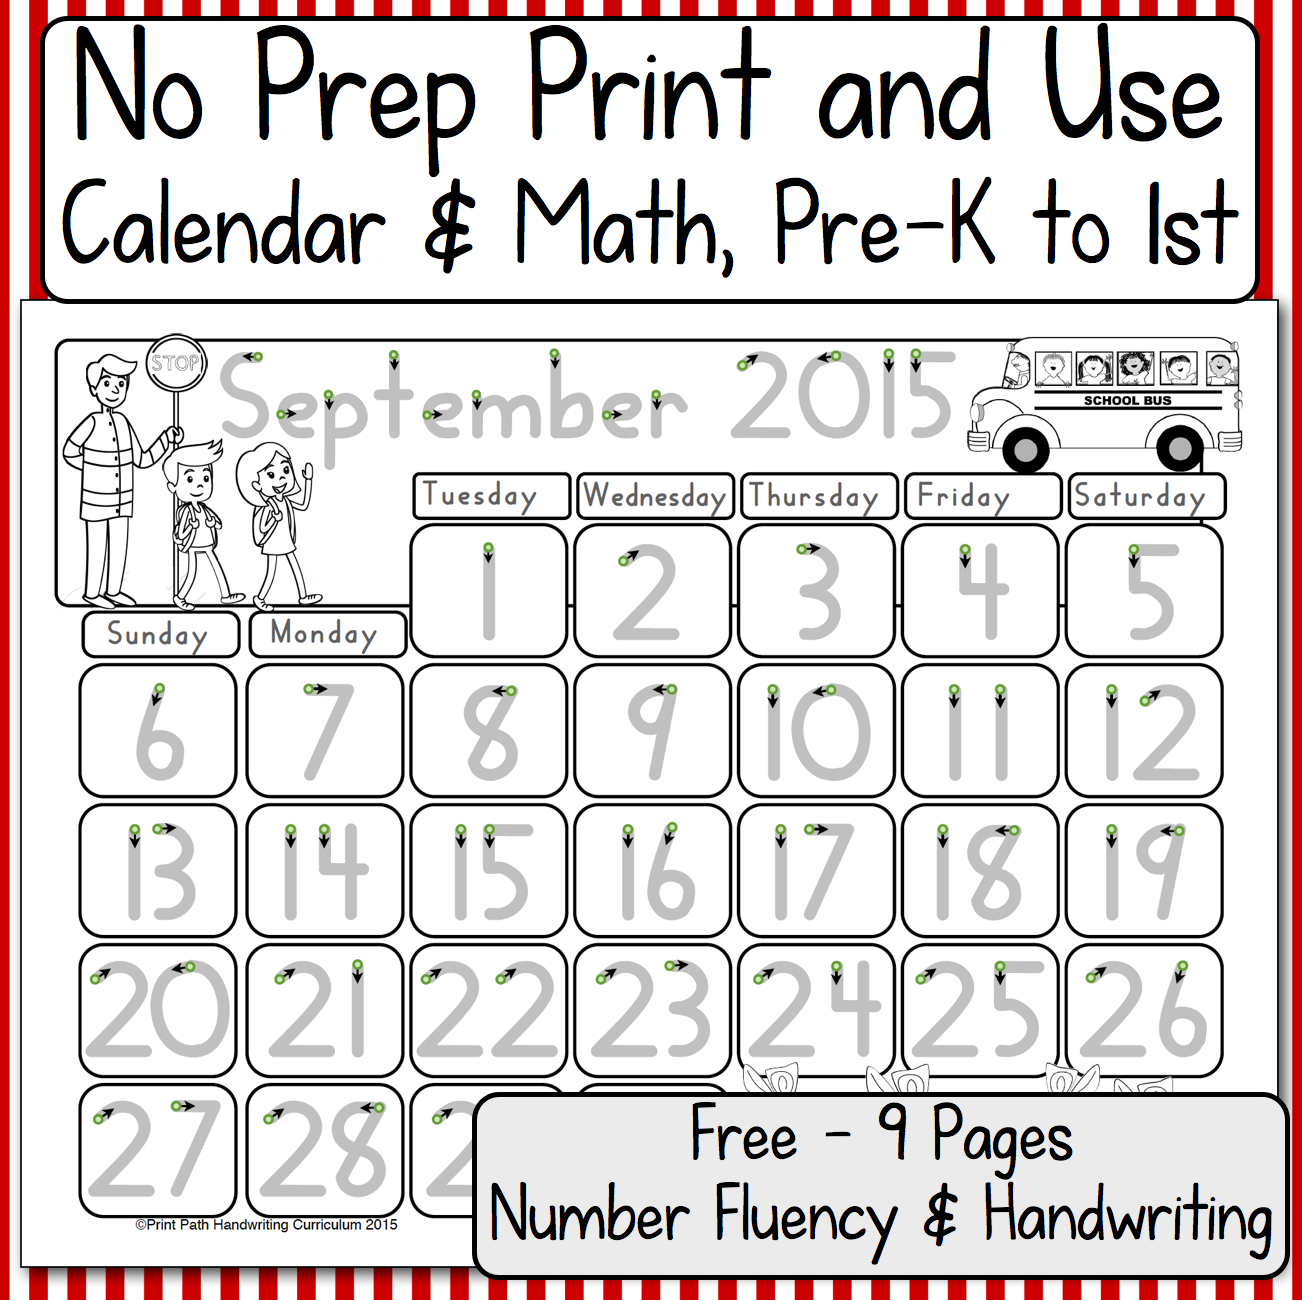 Capitals First!Print Path: Using Calendars For Number